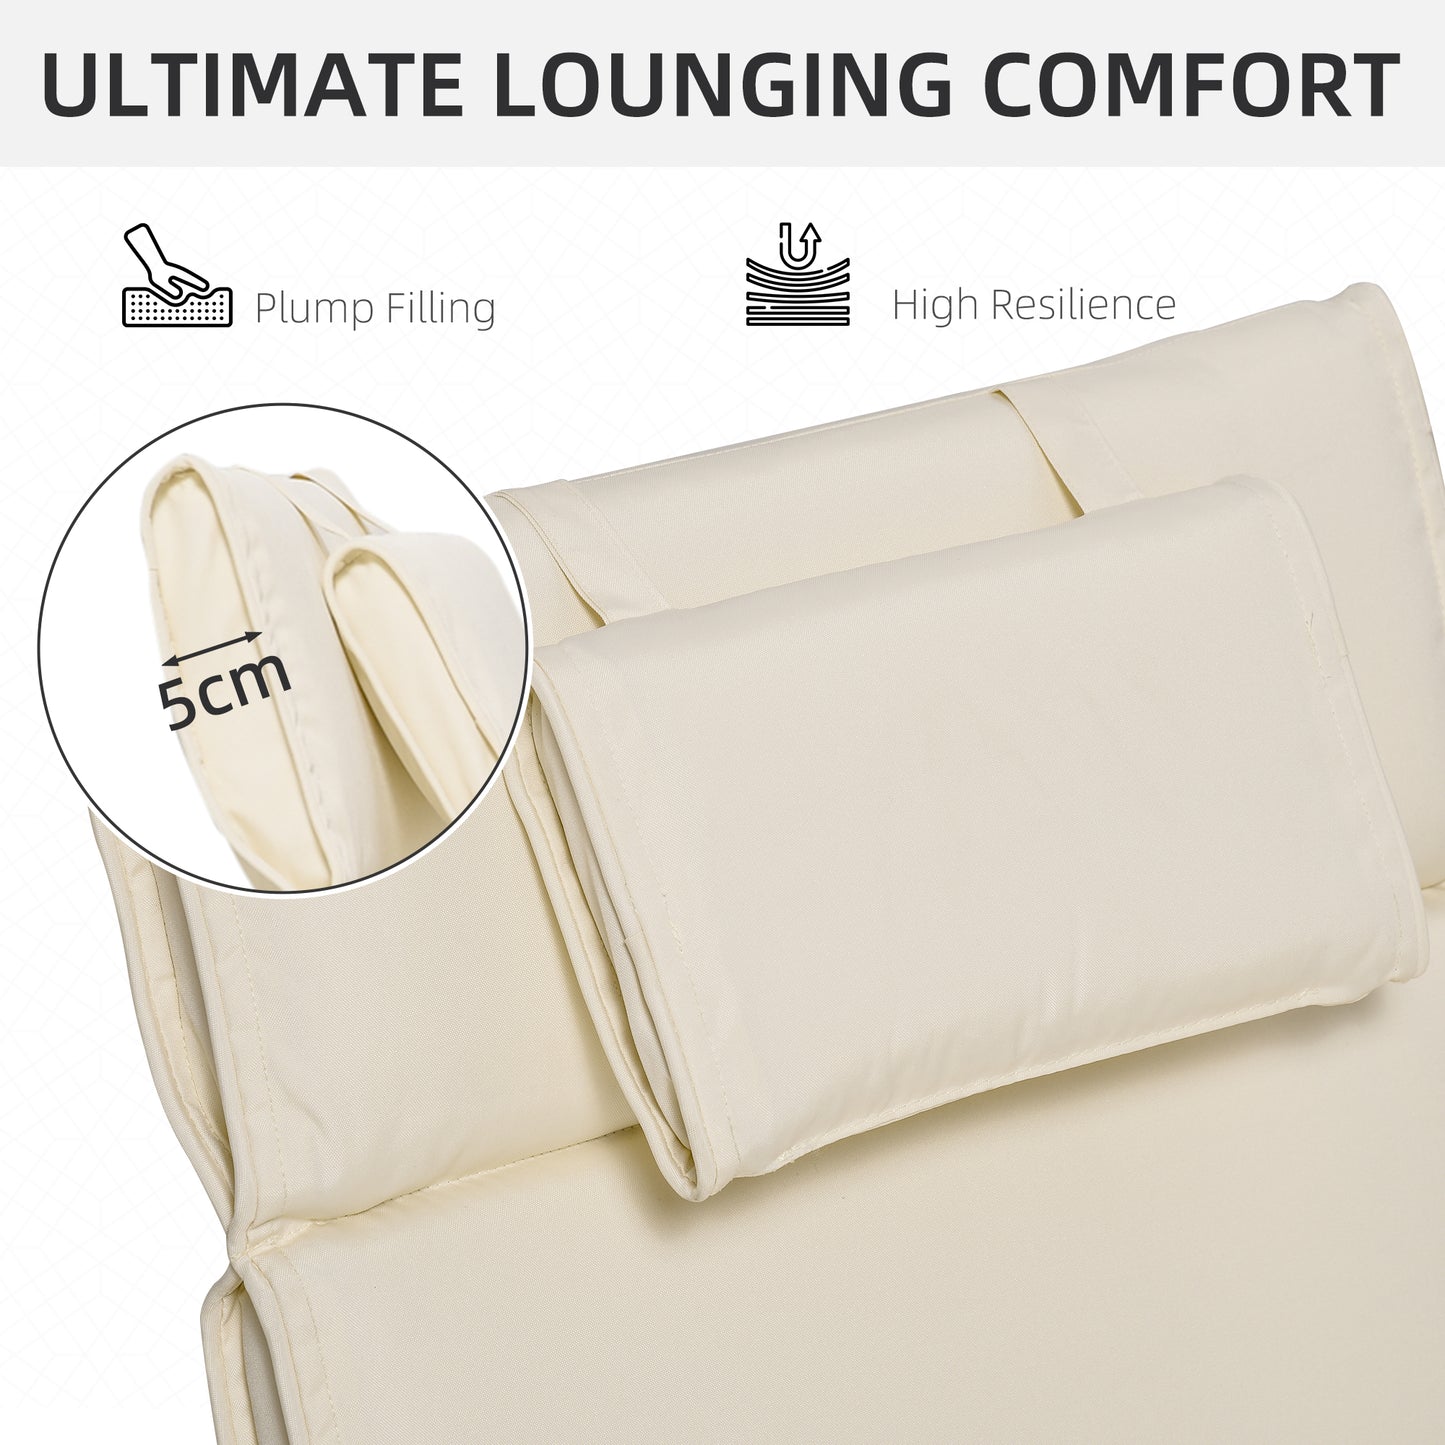 Outsunny Garden Sun Lounger Cushion Replacement Thick Sunbed Reclining Chair Relaxer Pad with Pillow - Cream White